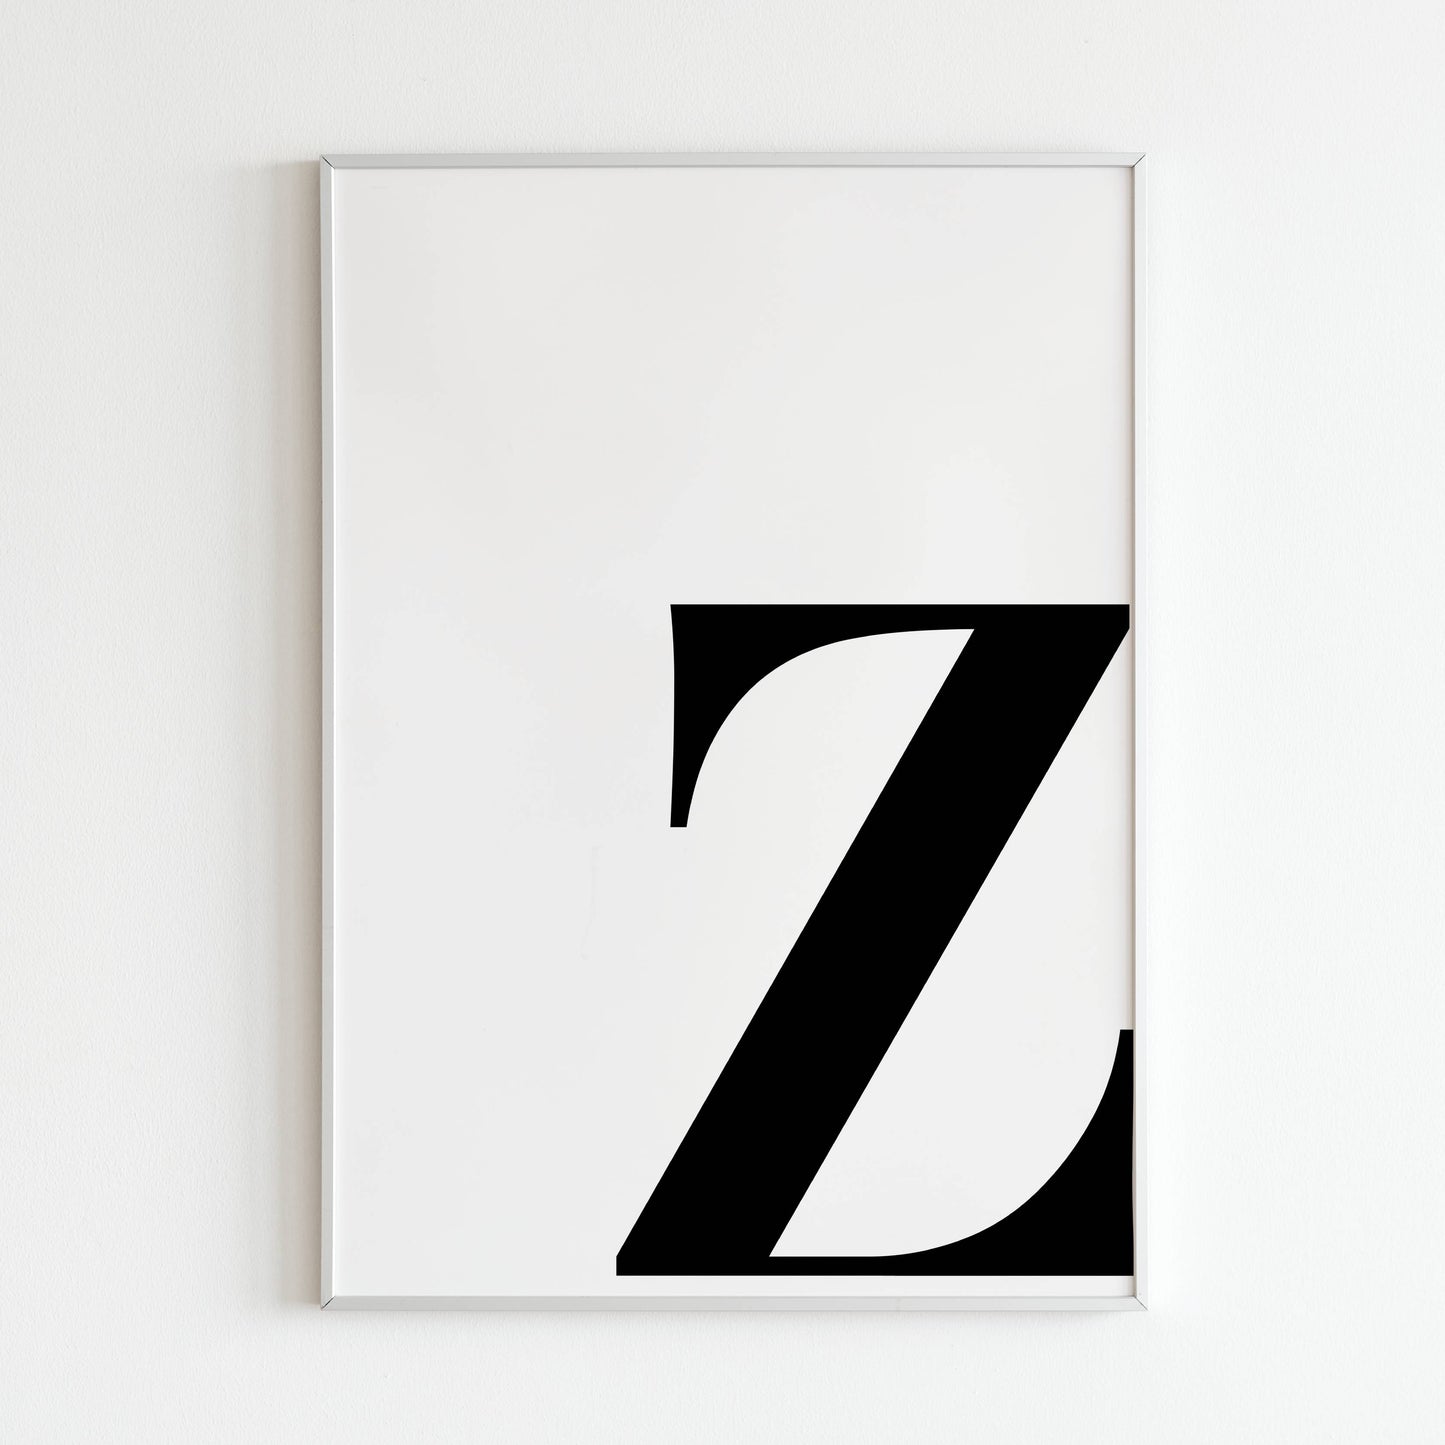 Printable letter Z poster - Decorate your space with this artistic typography print featuring the letter Z.